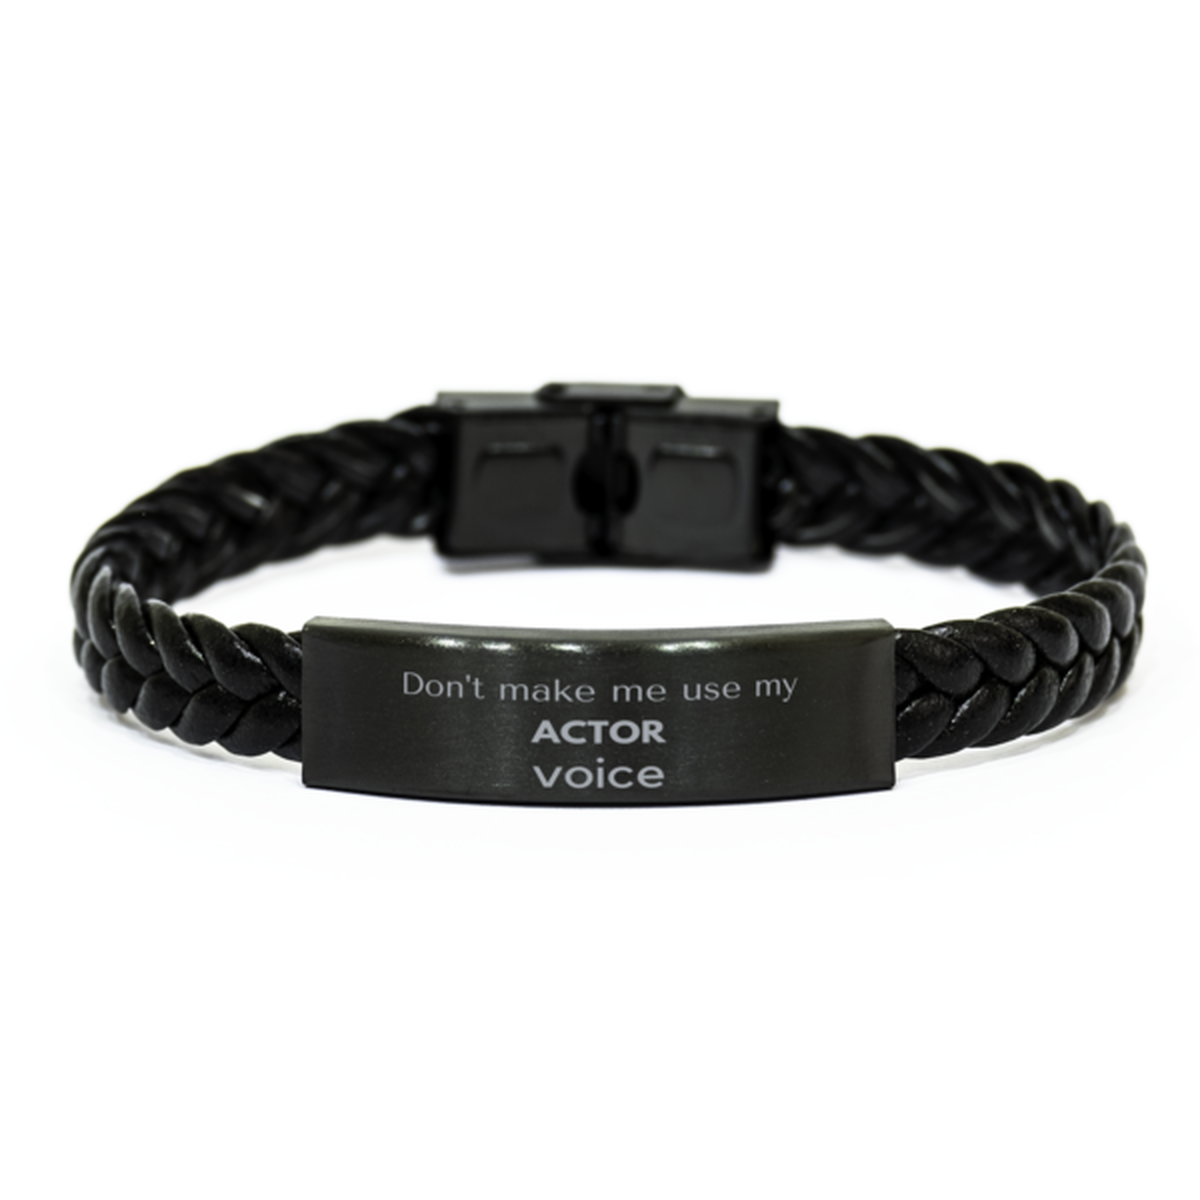 Don't make me use my Actor voice, Sarcasm Actor Gifts, Christmas Actor Braided Leather Bracelet Birthday Unique Gifts For Actor Coworkers, Men, Women, Colleague, Friends